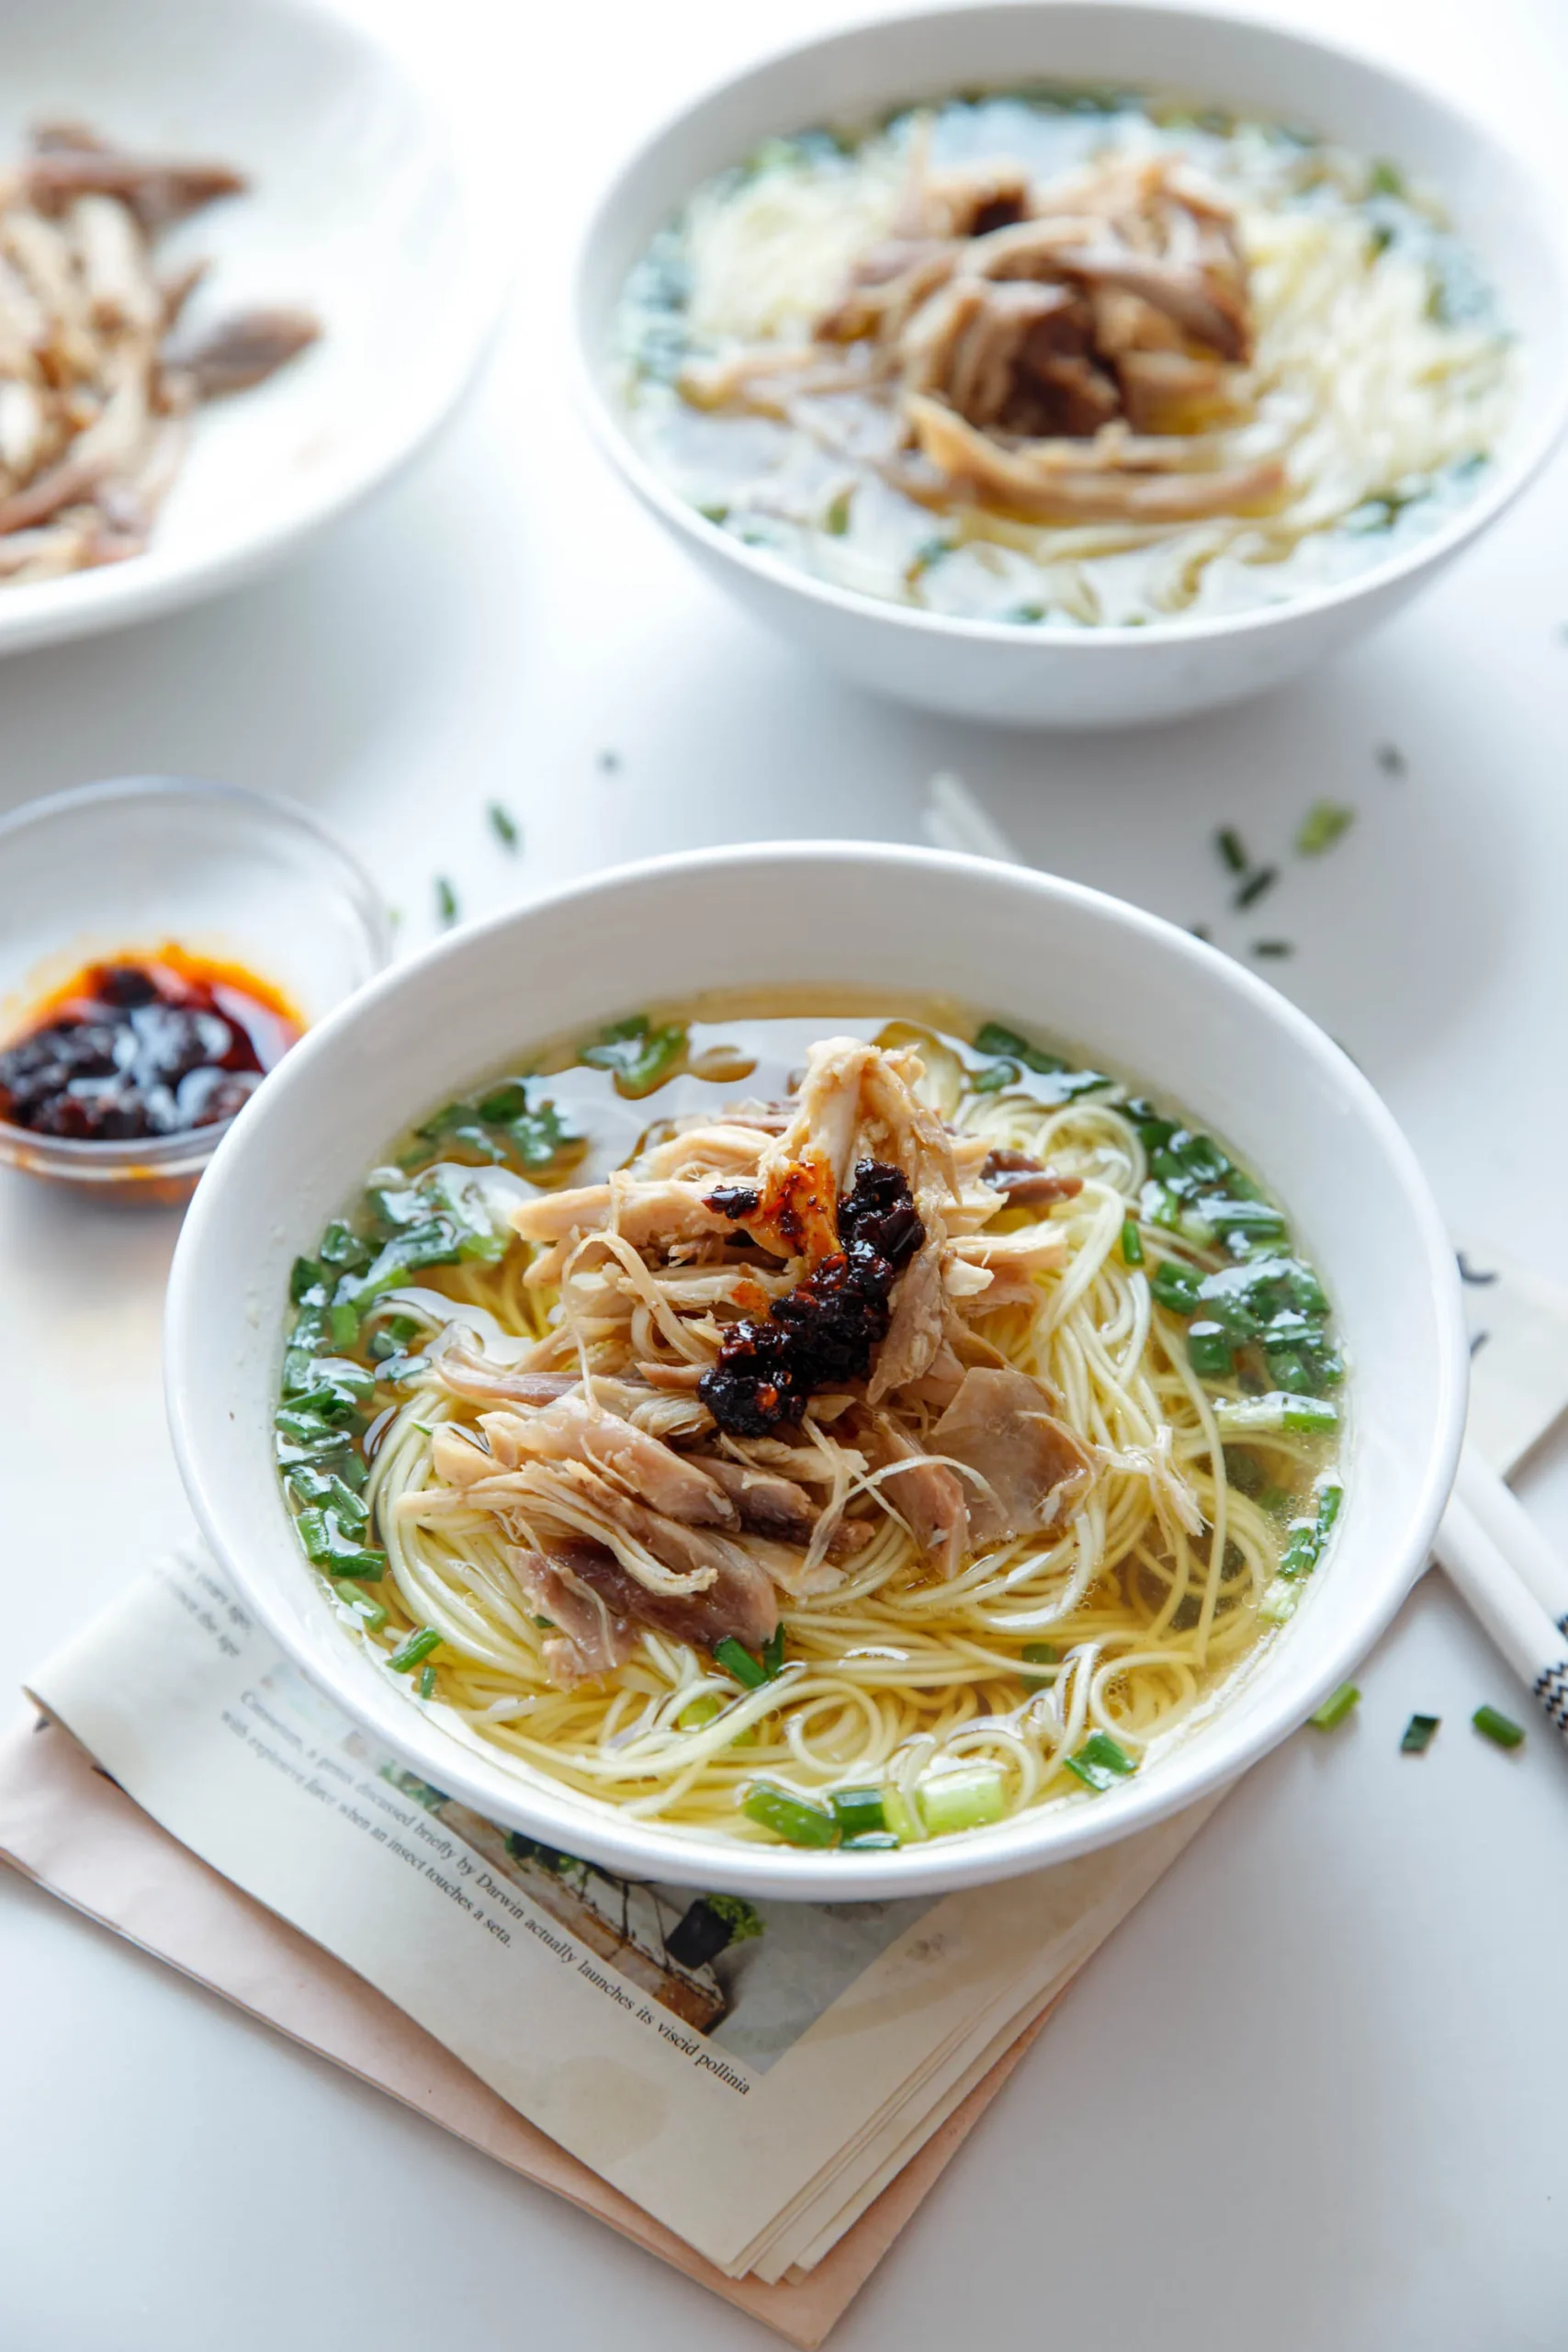 Chinese chicken noodle soup|chinasichuanfood.com